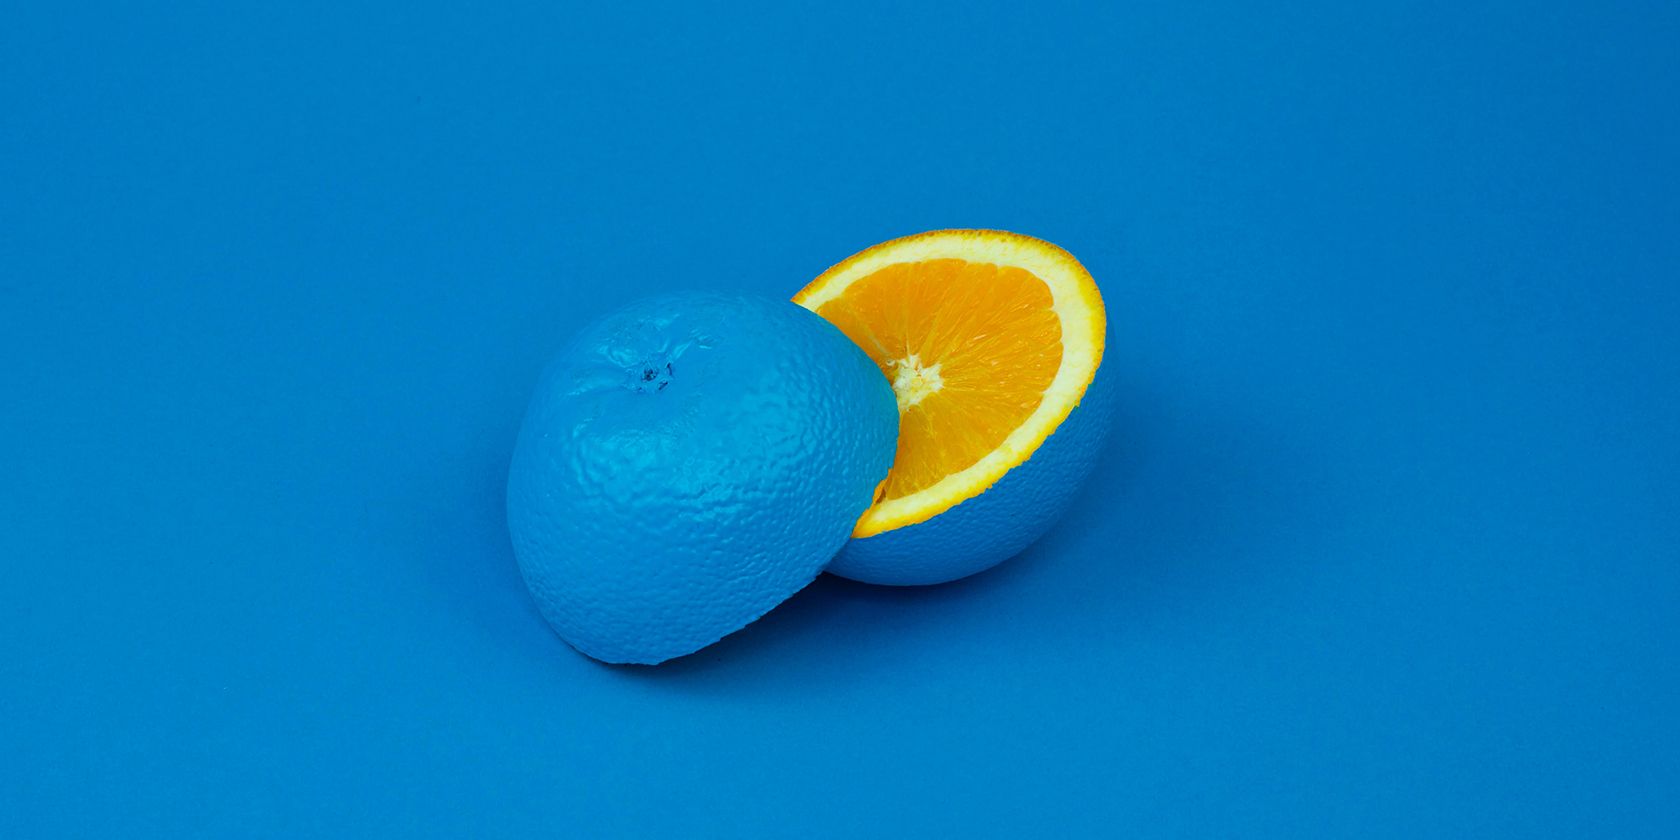 An orange painted with its complement, blue.